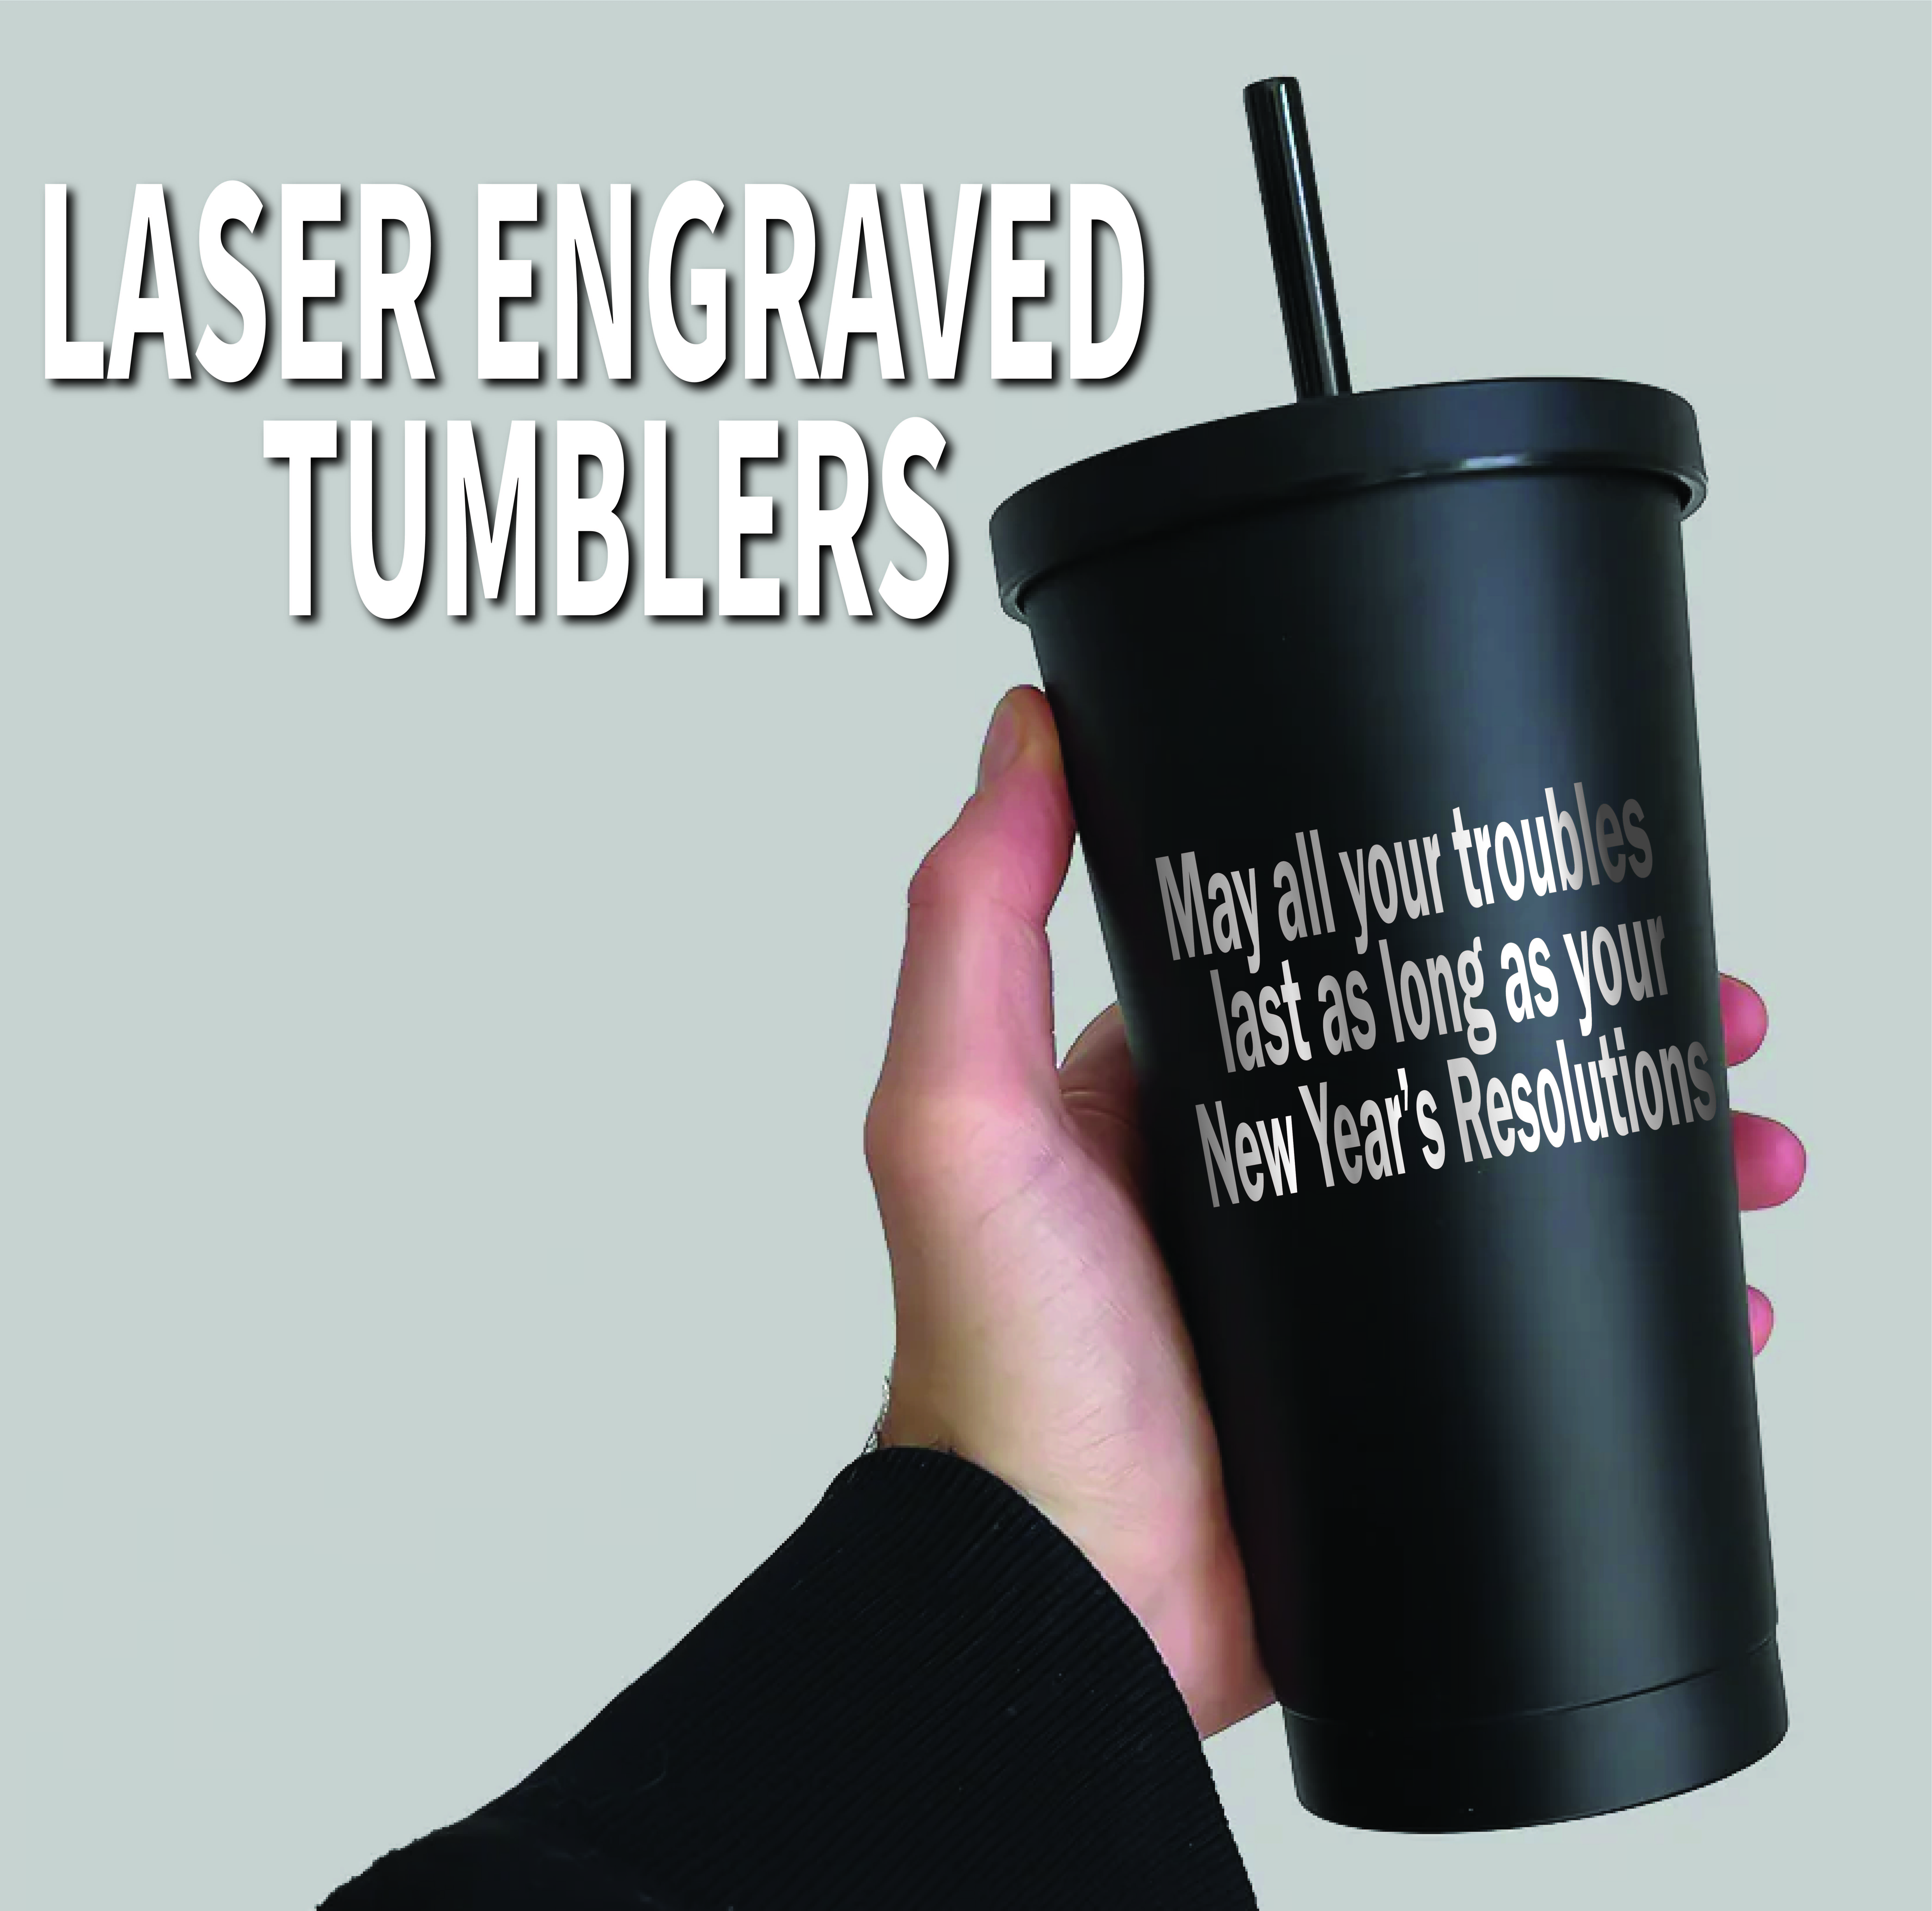 Tumbler engraved with New Year's quote